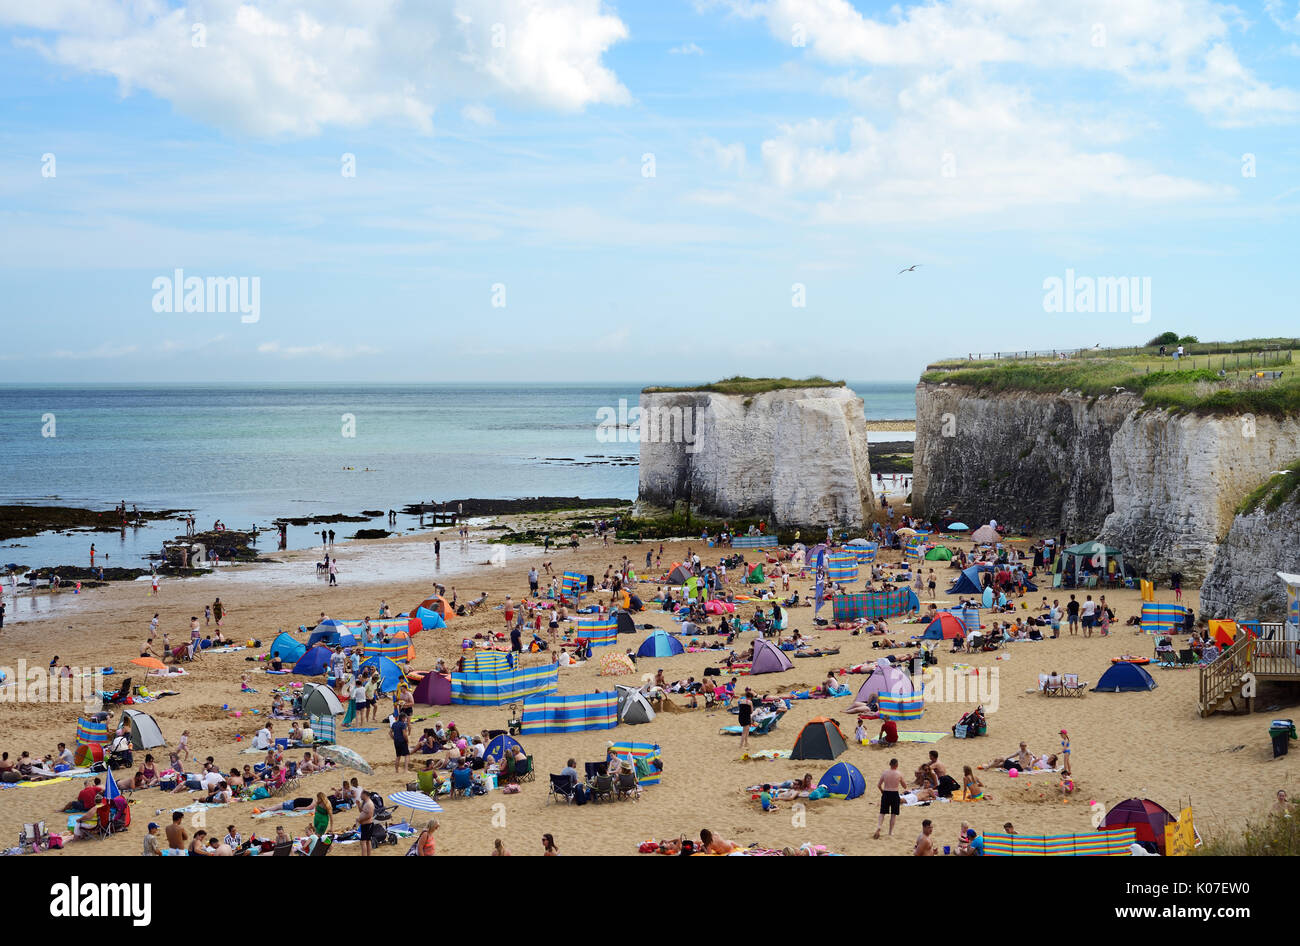 Botany Bay is in Broadstairs, Kent on the English south east coast - excellent beaches and dramatic cliffs make it a popular tourist destination. Stock Photo